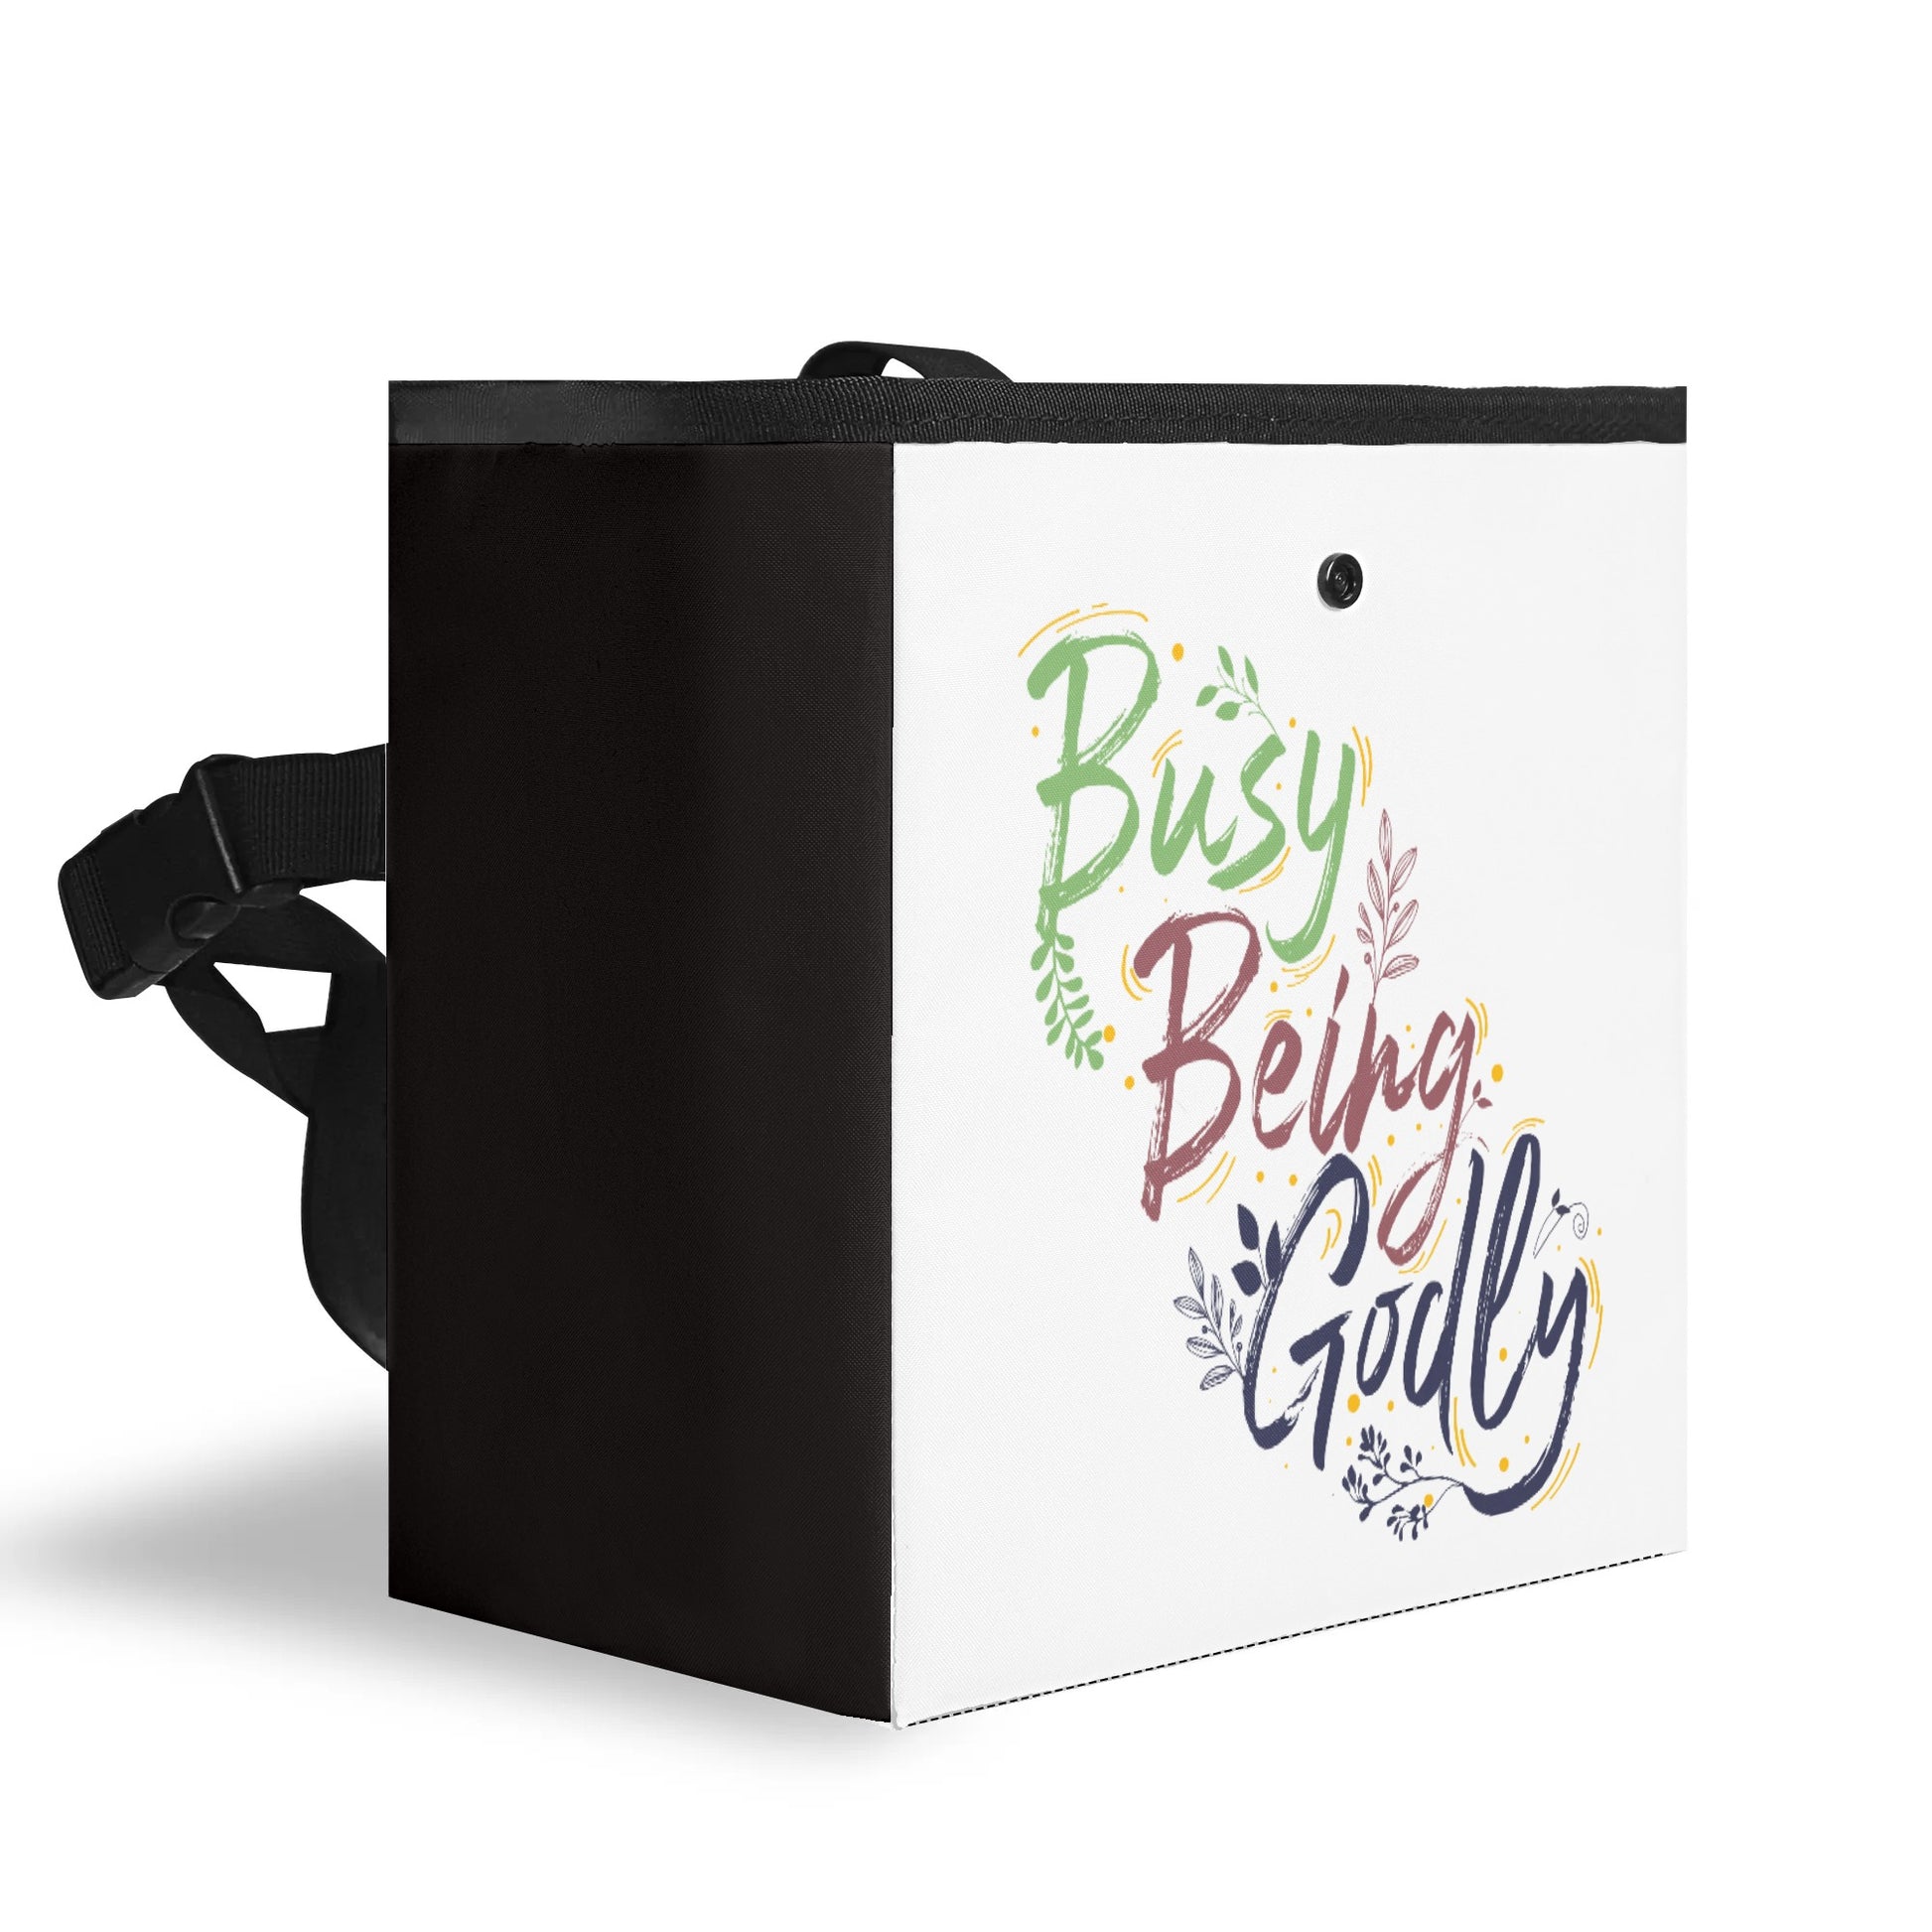 Busy Being Godly Hanging Storage Trash Car Organizer Bag Christian Car Accessories popcustoms